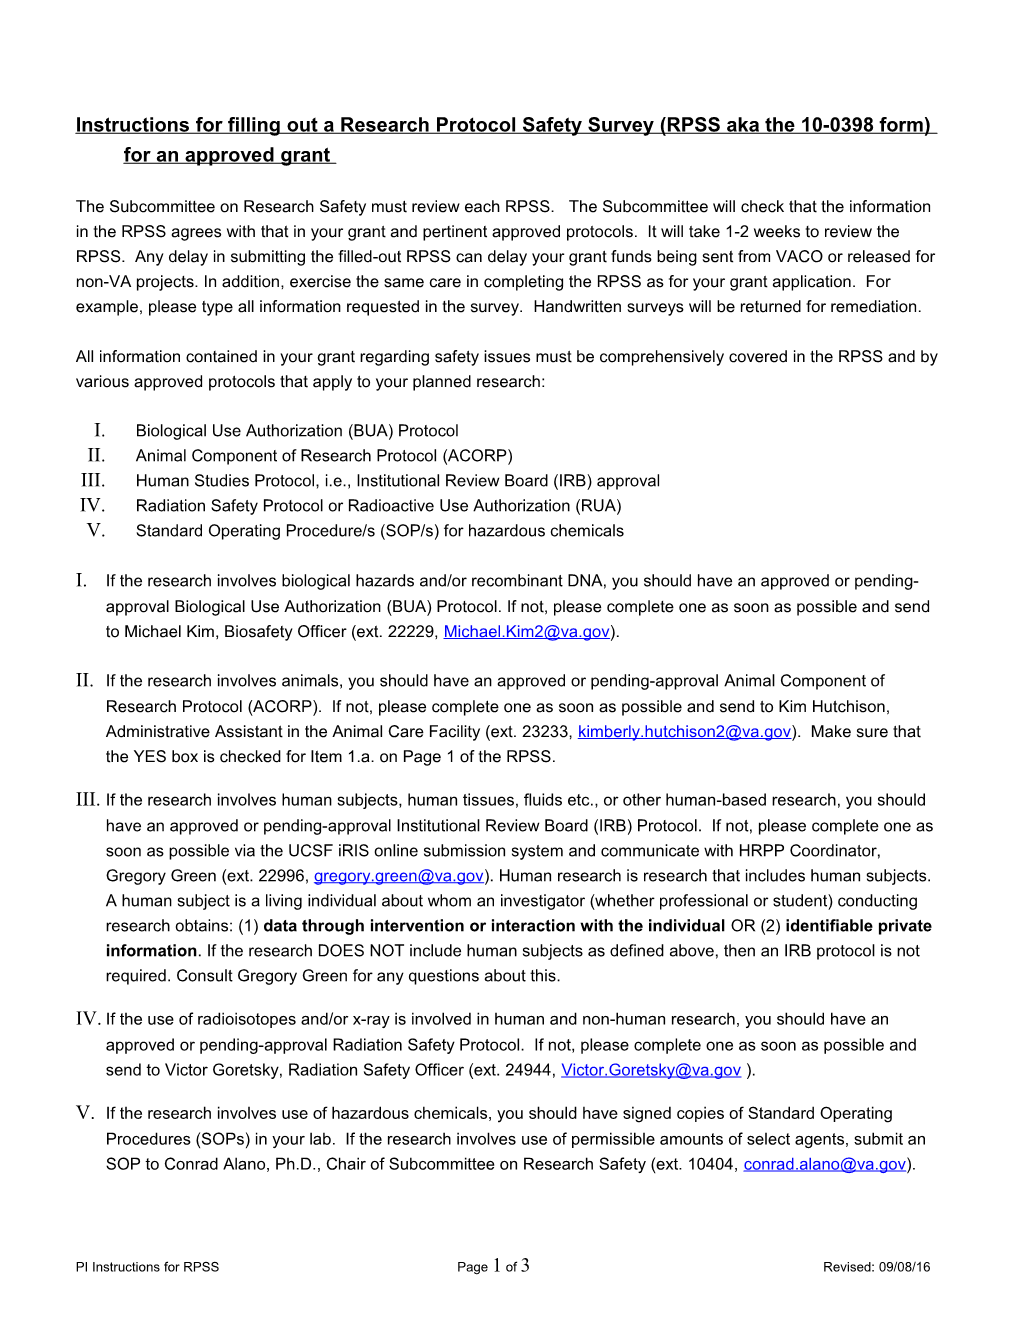 Instructions for Filling out a Research Protocol Safety Survey (RPSS) for an Approved Grant